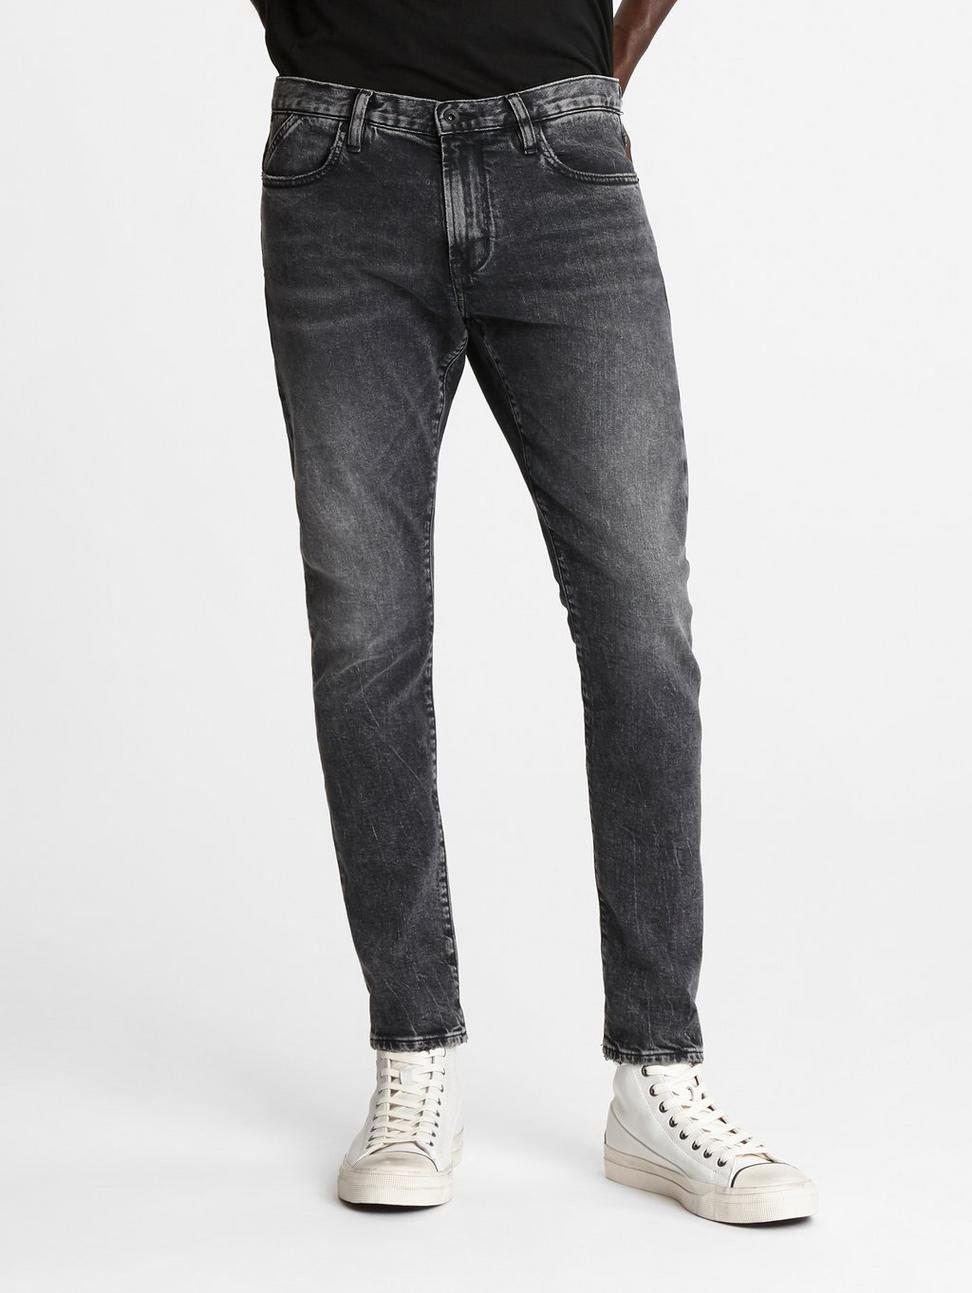 The Matchstick Fit Jean